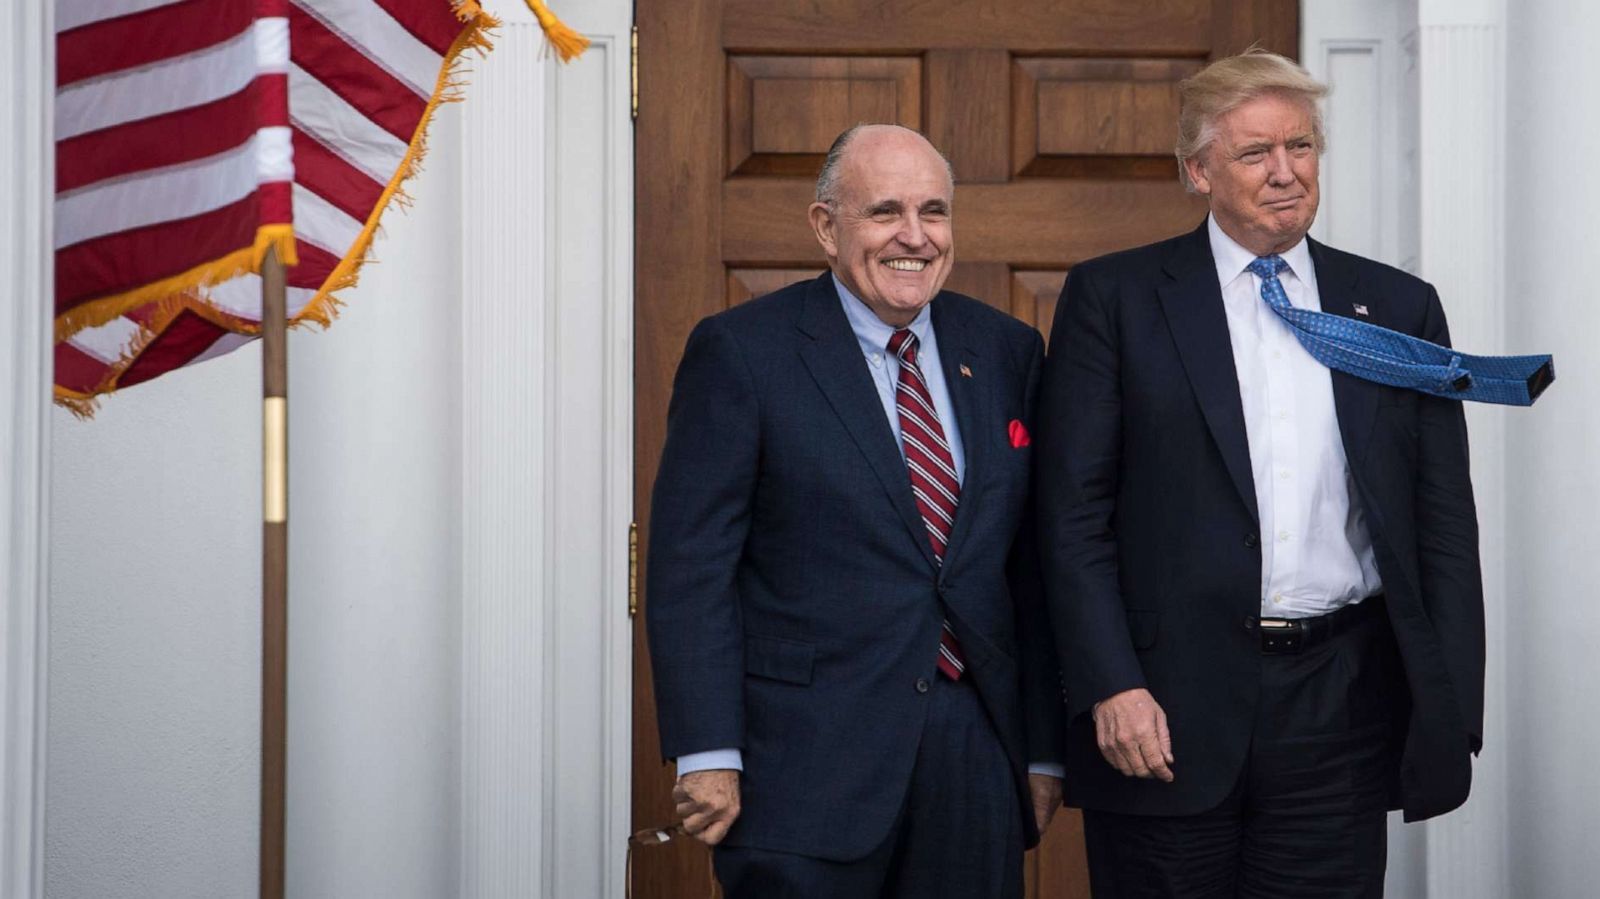 Rudy Giuliani's residence has been raided by federal investigators